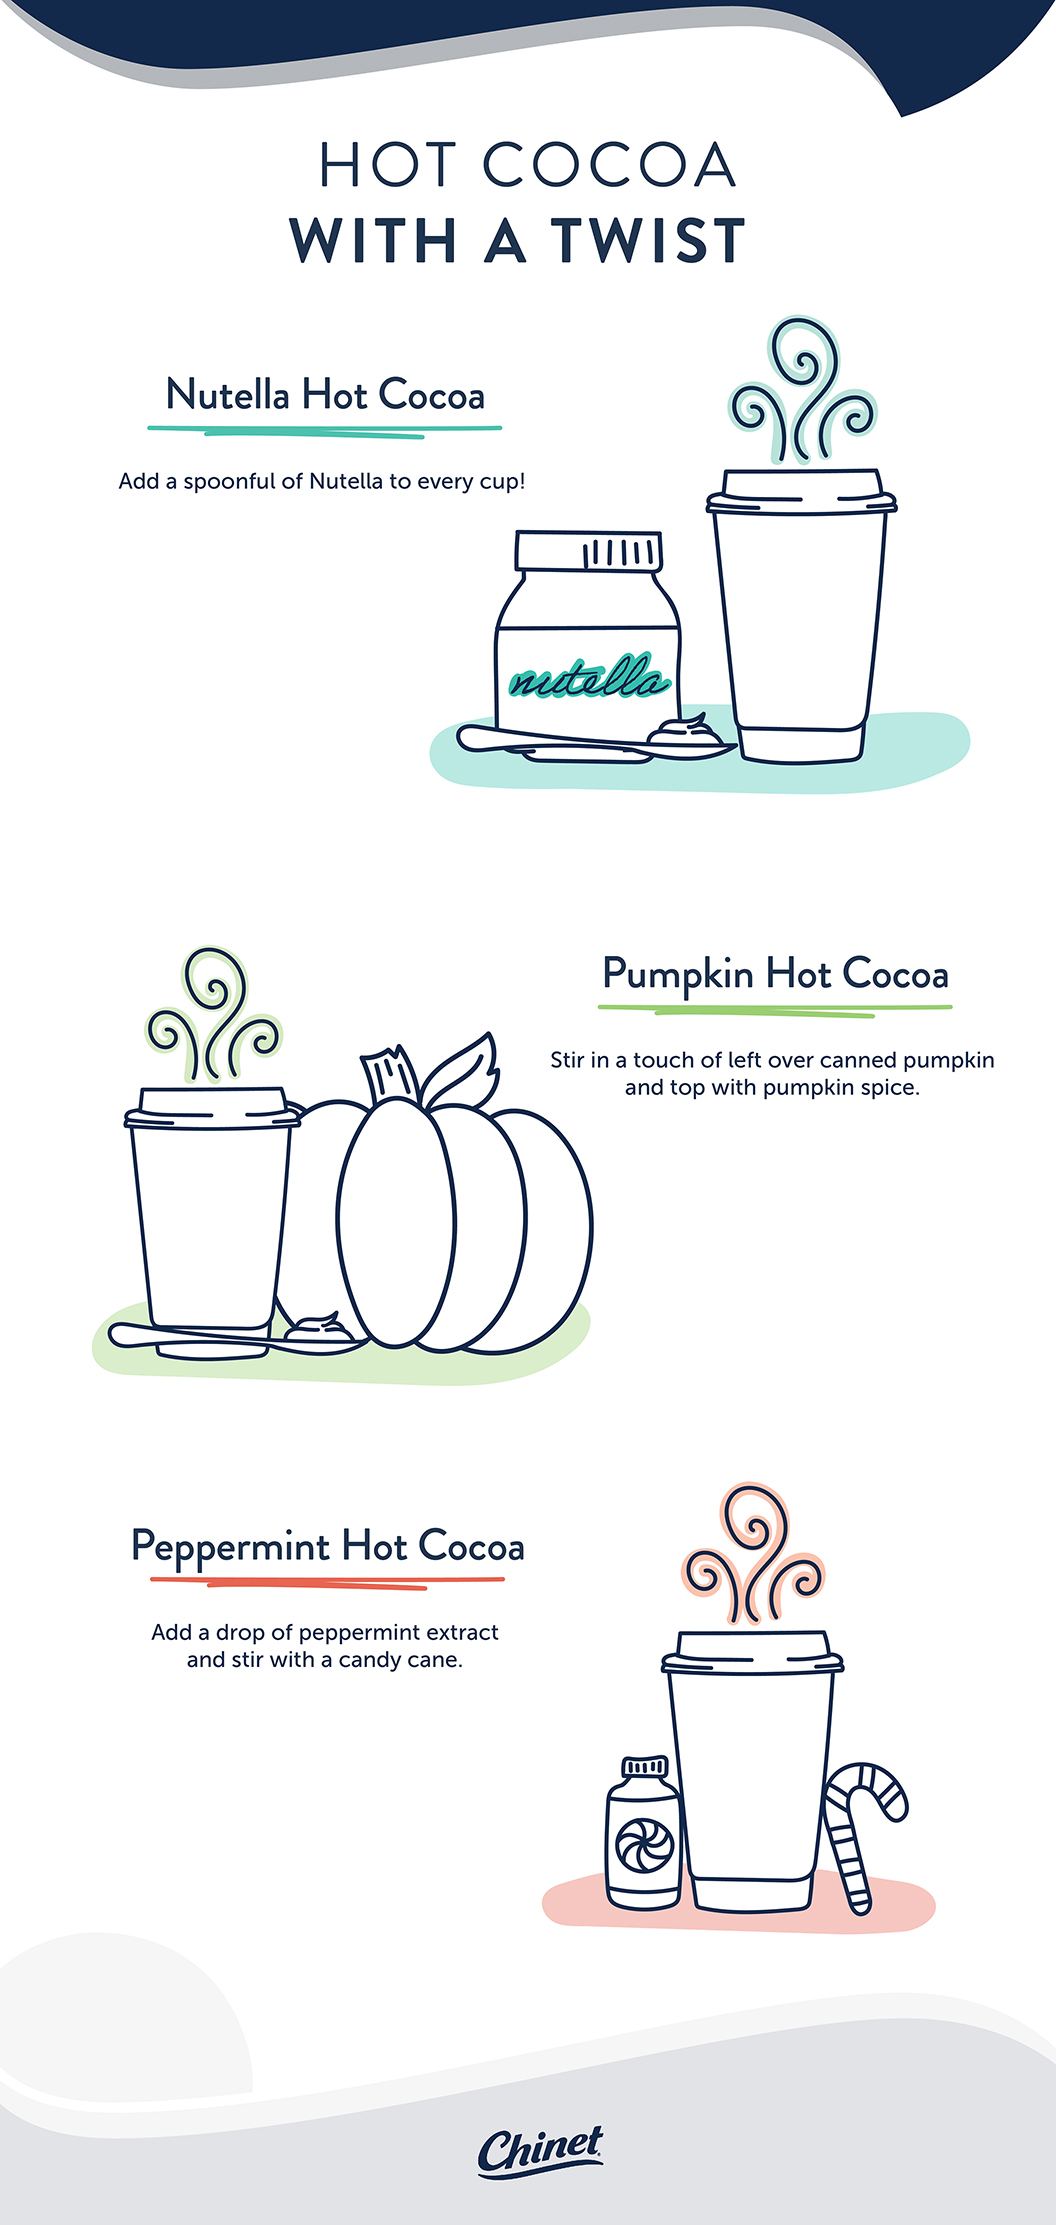 Chinet hot cocoa guide